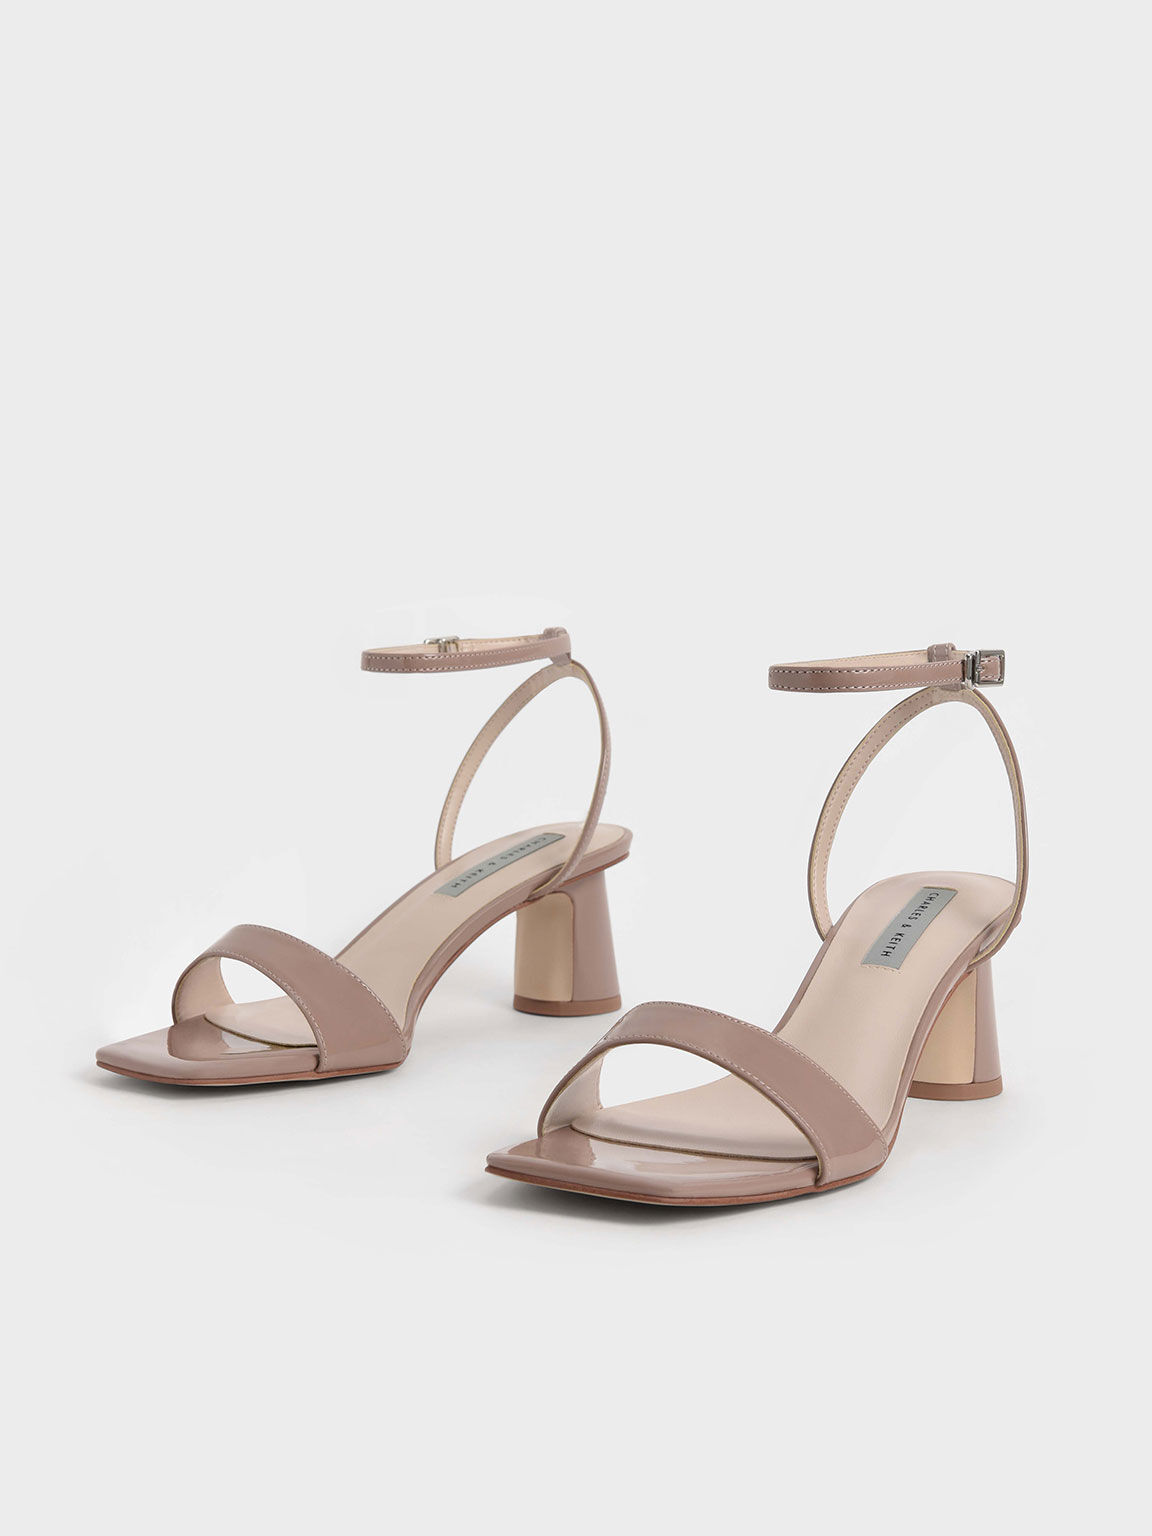 Sandal Cylindrical Heel Patent Ankle-Strap, Nude, hi-res